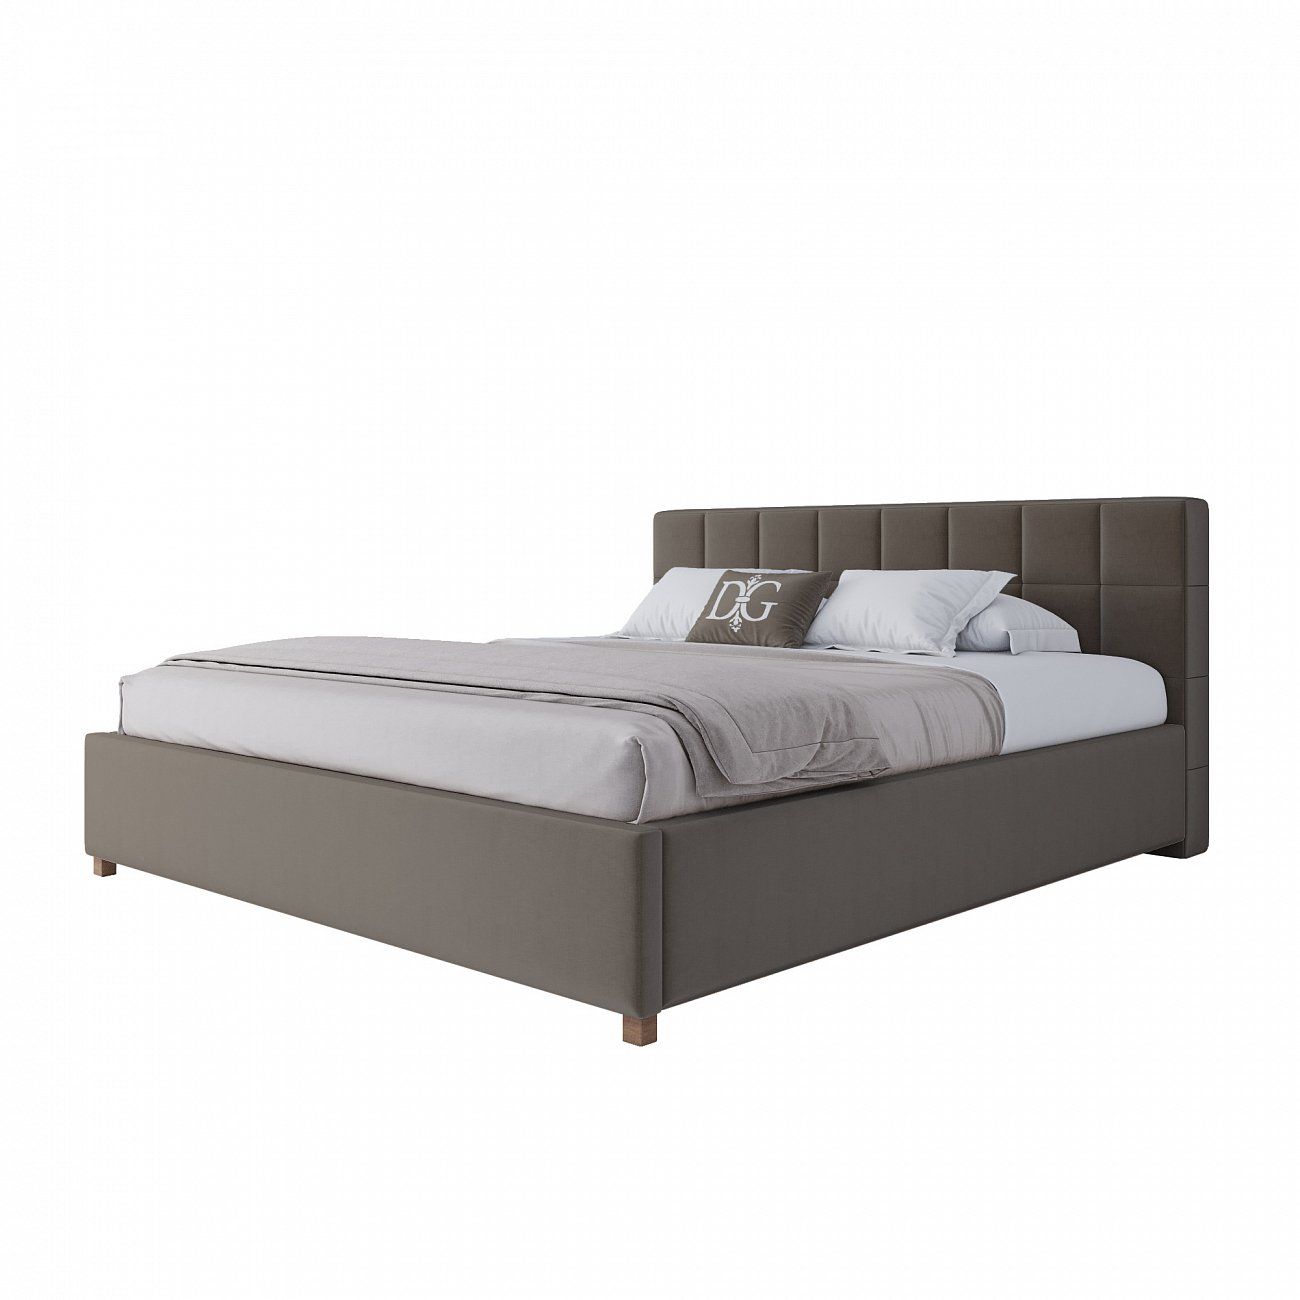 Double bed 180x200 cm grey-brown Wales